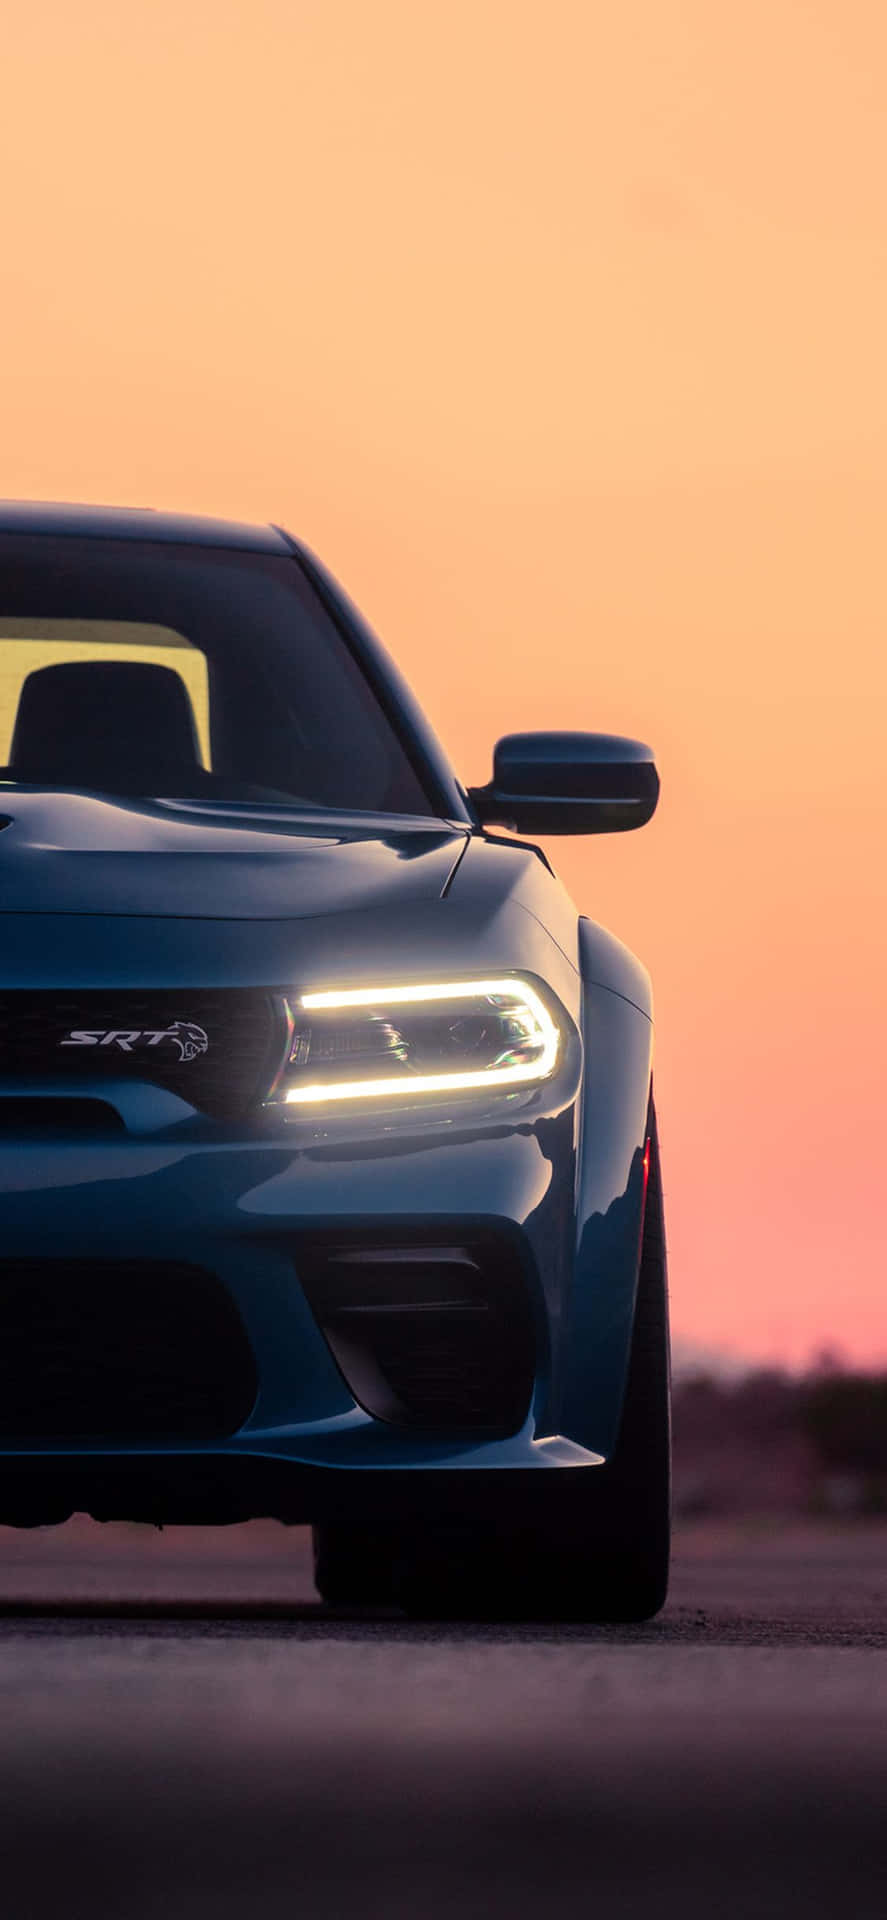 Experience the raw power of Dodge's Scat Pack Wallpaper